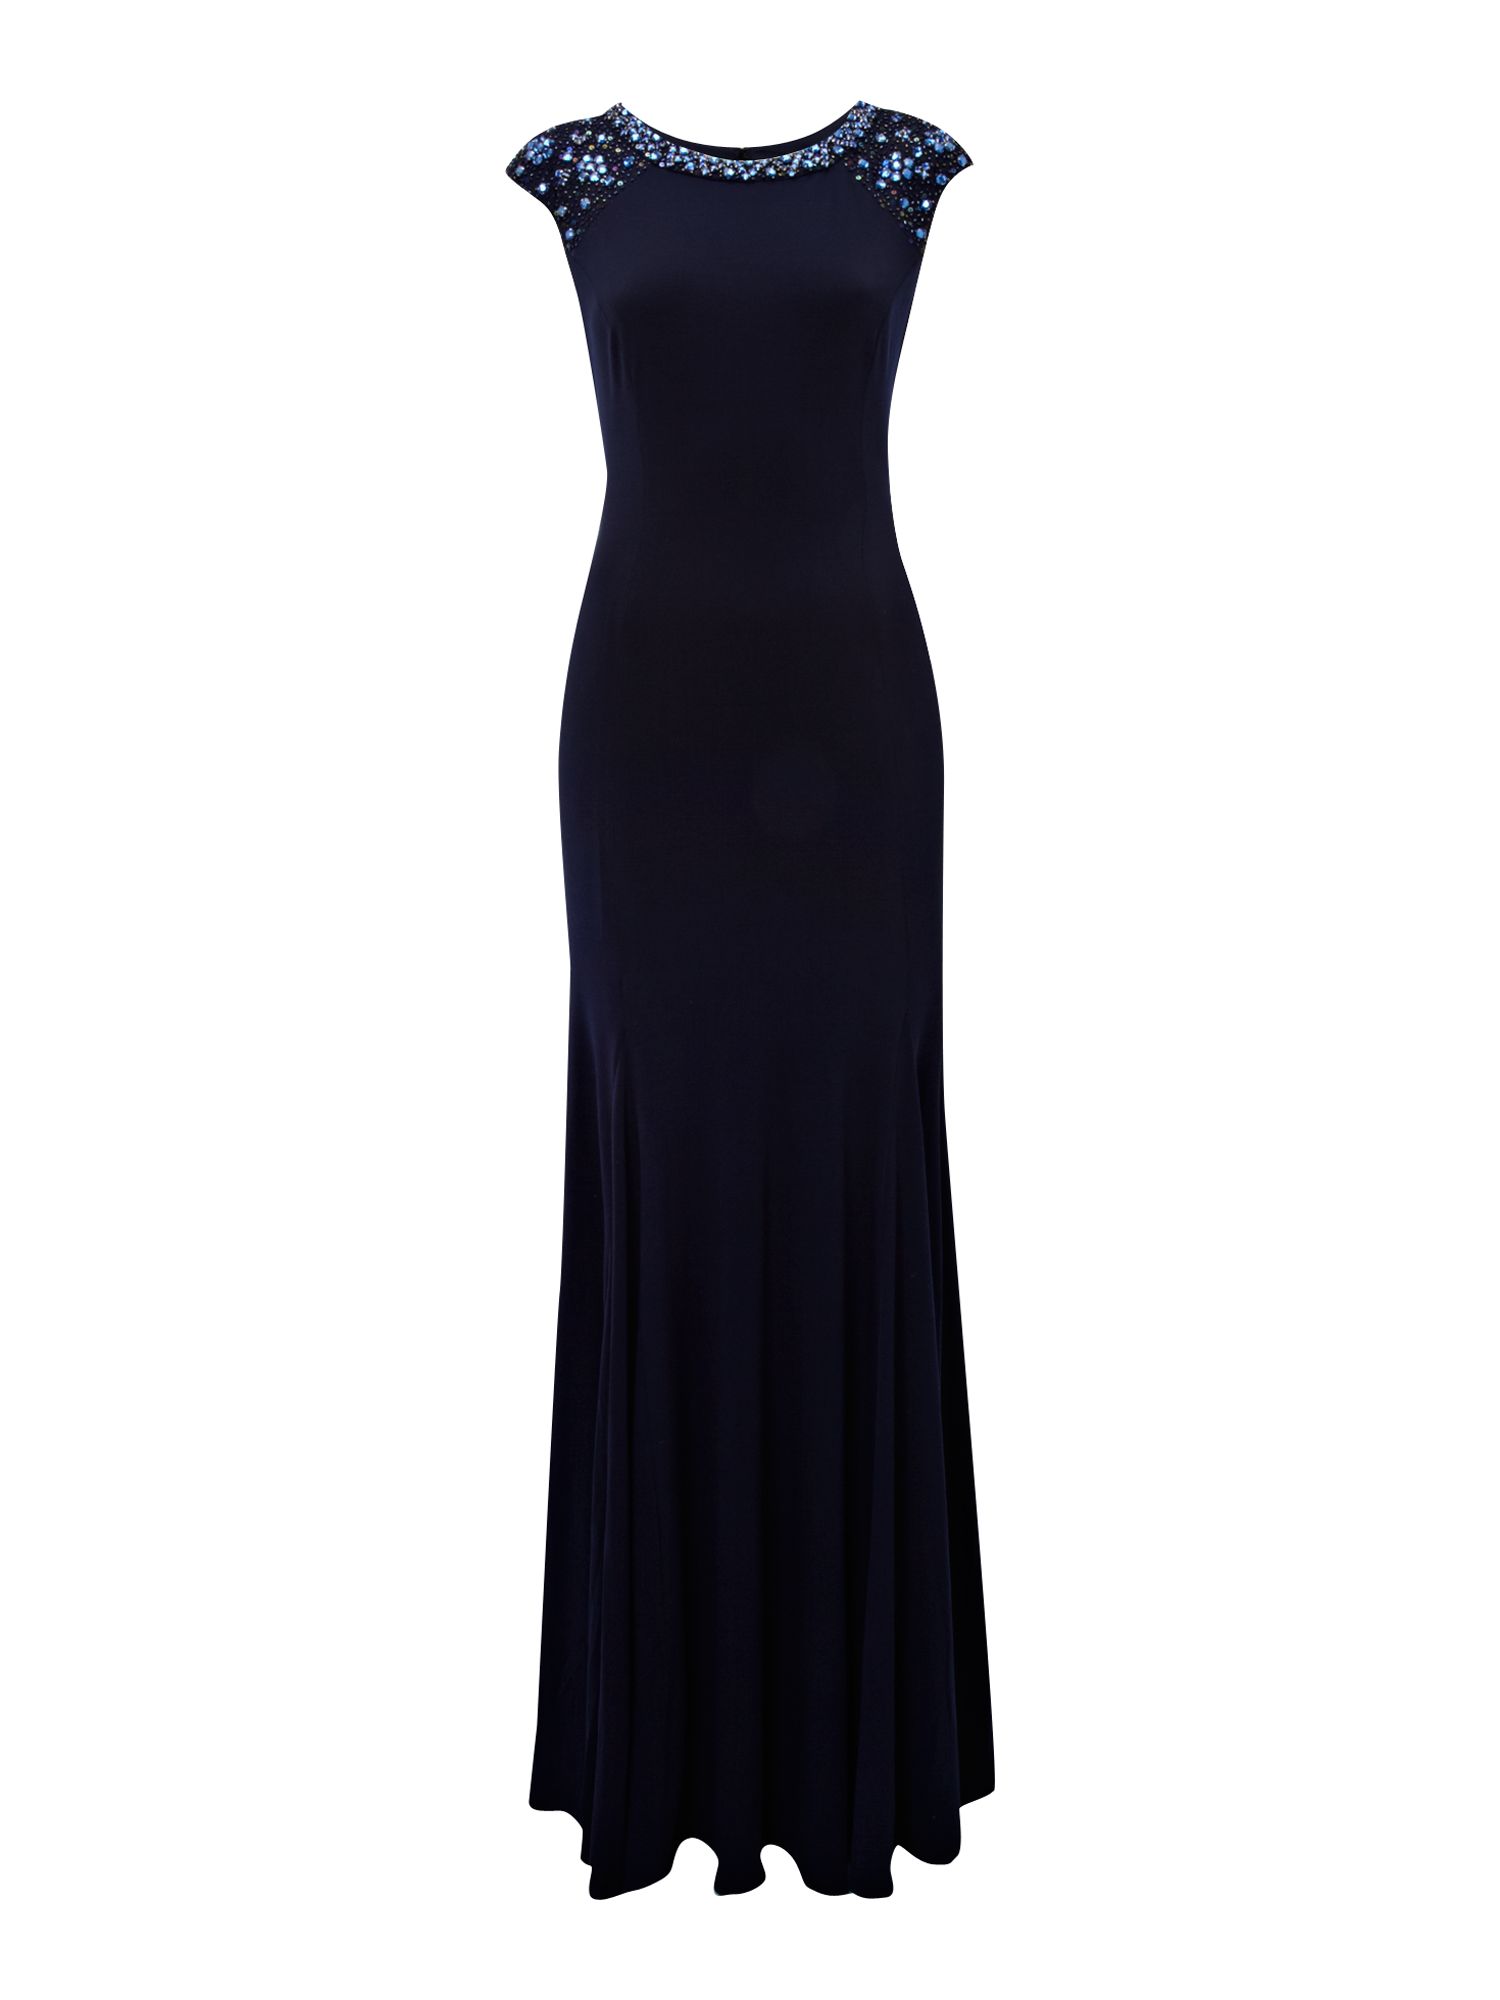 Js Collections Backless Long Jersey Dress in Blue (navy) | Lyst